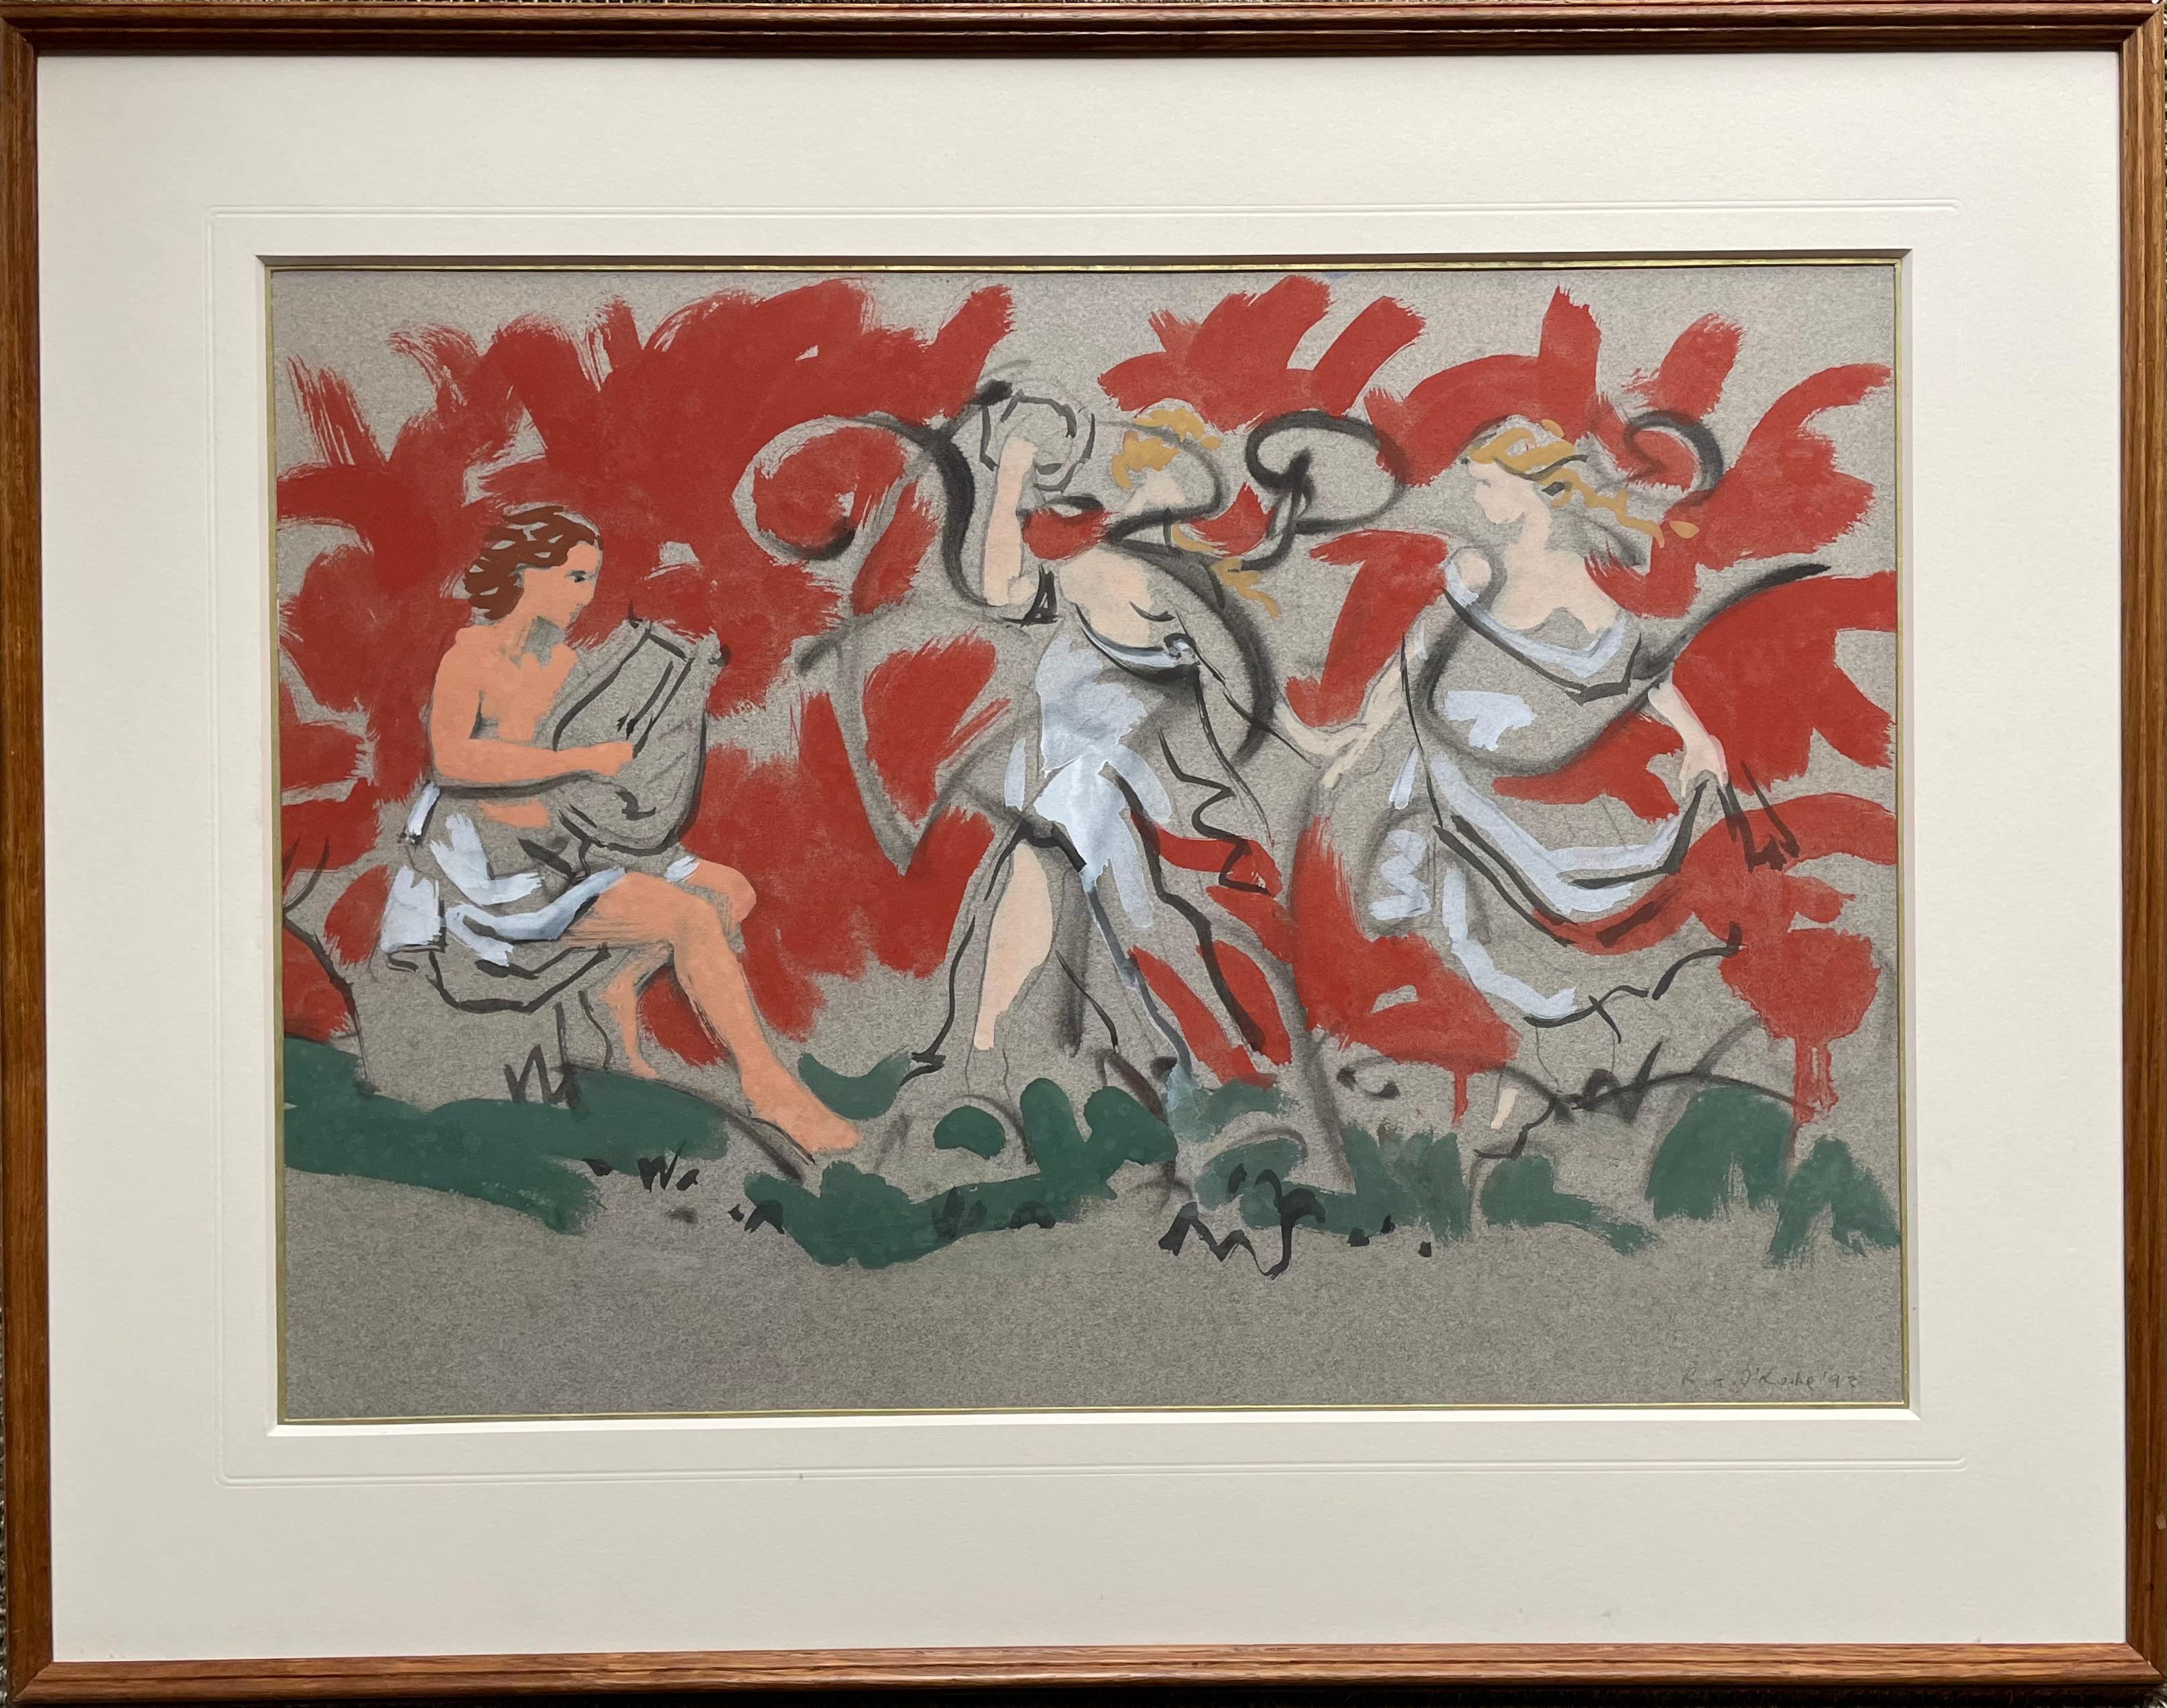 ROBERT O’RORKE
(Born 1945)

Orpheus

Signed and dated l.r.: Rbt O’Rorke ’93; signed, dated 1993 and inscribed The Dance No.3 on a label attached to the backboard
Watercolour on grey paper
Framed

33.5 by 47 cm., 13 ¼ by 18 ½ in.
(frame size 50 by